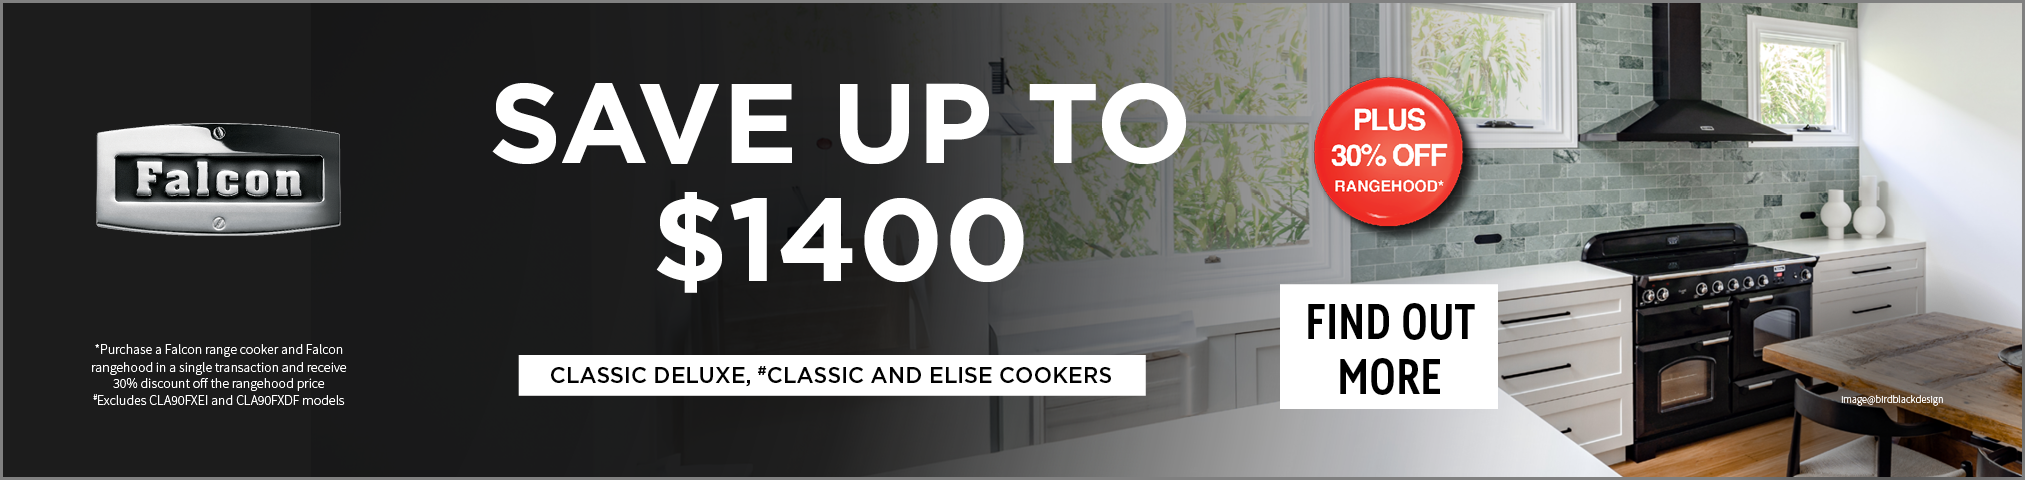 Save Up To $1,400* On Falcon Classic Deluxe, Classic, and Elise Cookers